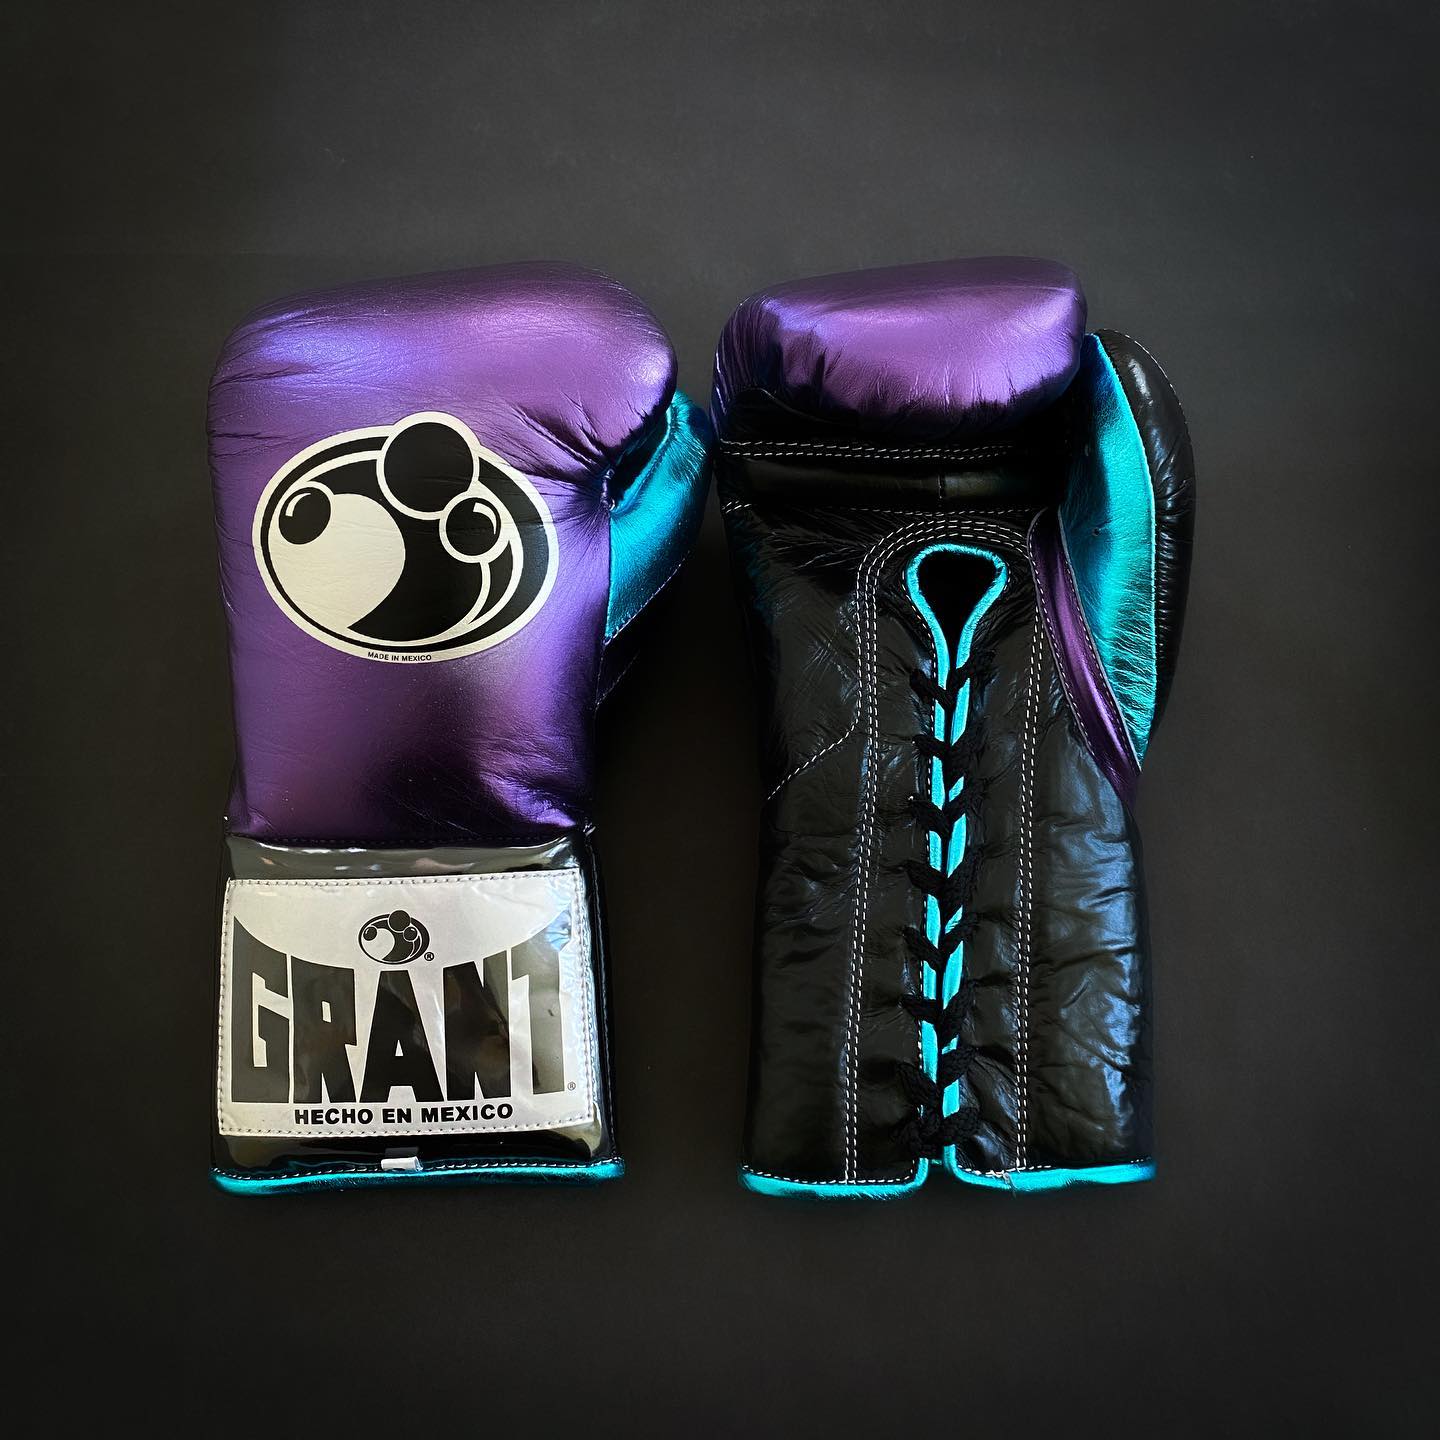 Winning boxing glove, winning boxing set, grant boxing glove, grant velcro gloves, winning velcro glove, clete reyes boxing, No boxing no life glove, Christmas gift for mens, Thanksgiving gift for her, Anniversary gifts for him, wedding gifts,winning velcro gloves, winning velcro glove winning open face head guard winning laceup gloves Winning Boxing set winning boxing glove wedding gifts unique gifts Thanksgiving gift for her purple grant gloves